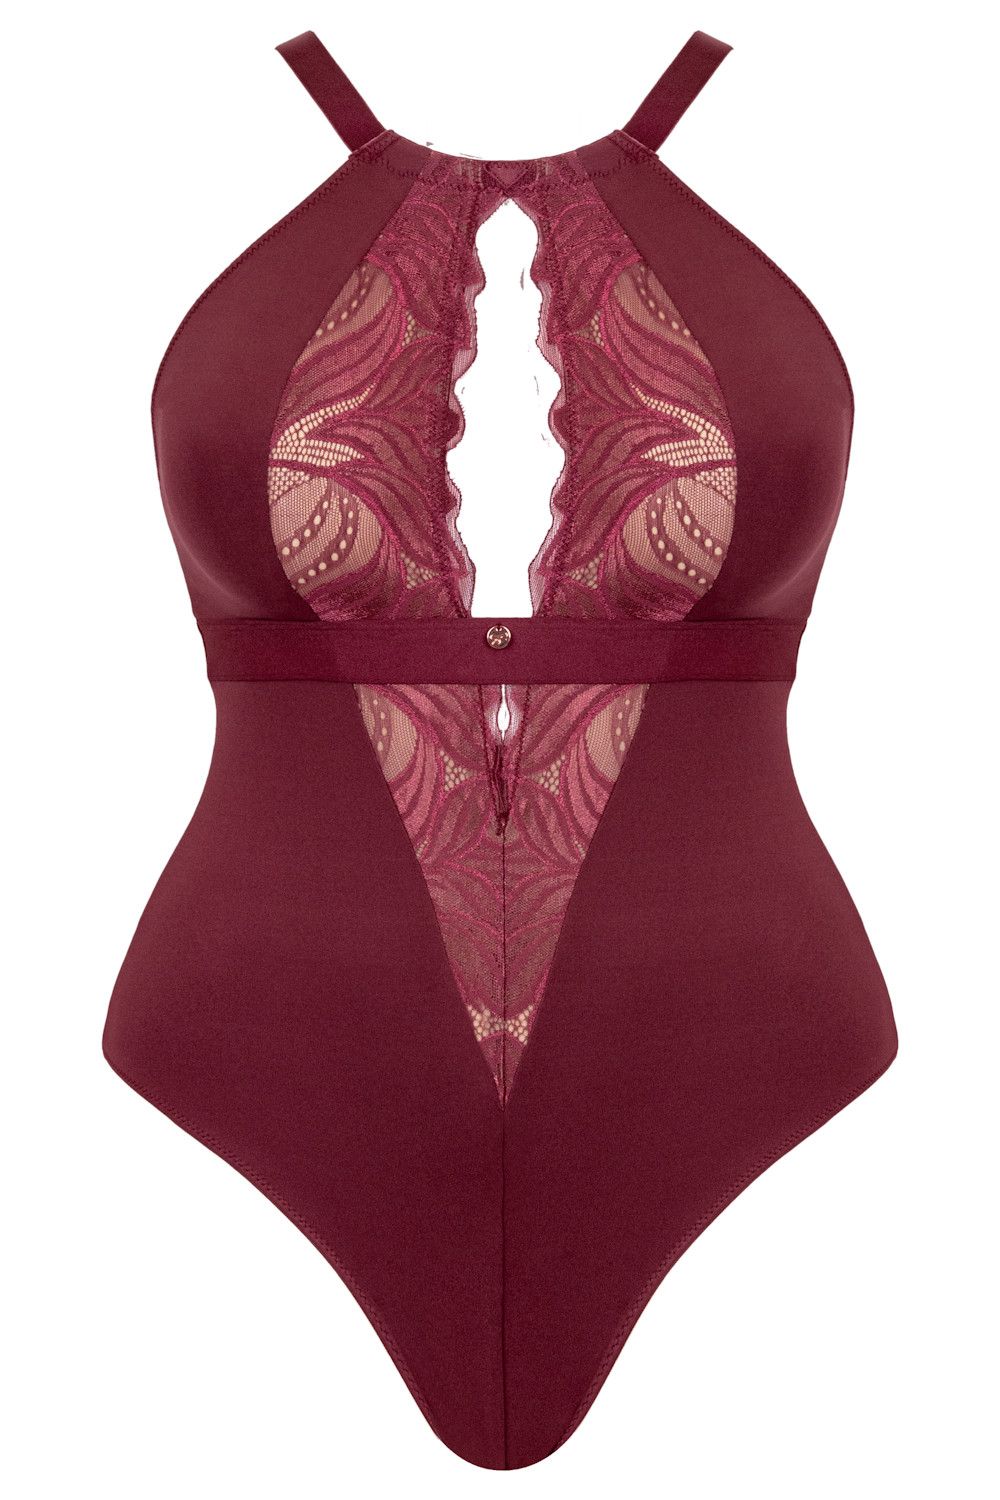 Scantilly by Curvy Kate Indulgence Lace Body Oxblood